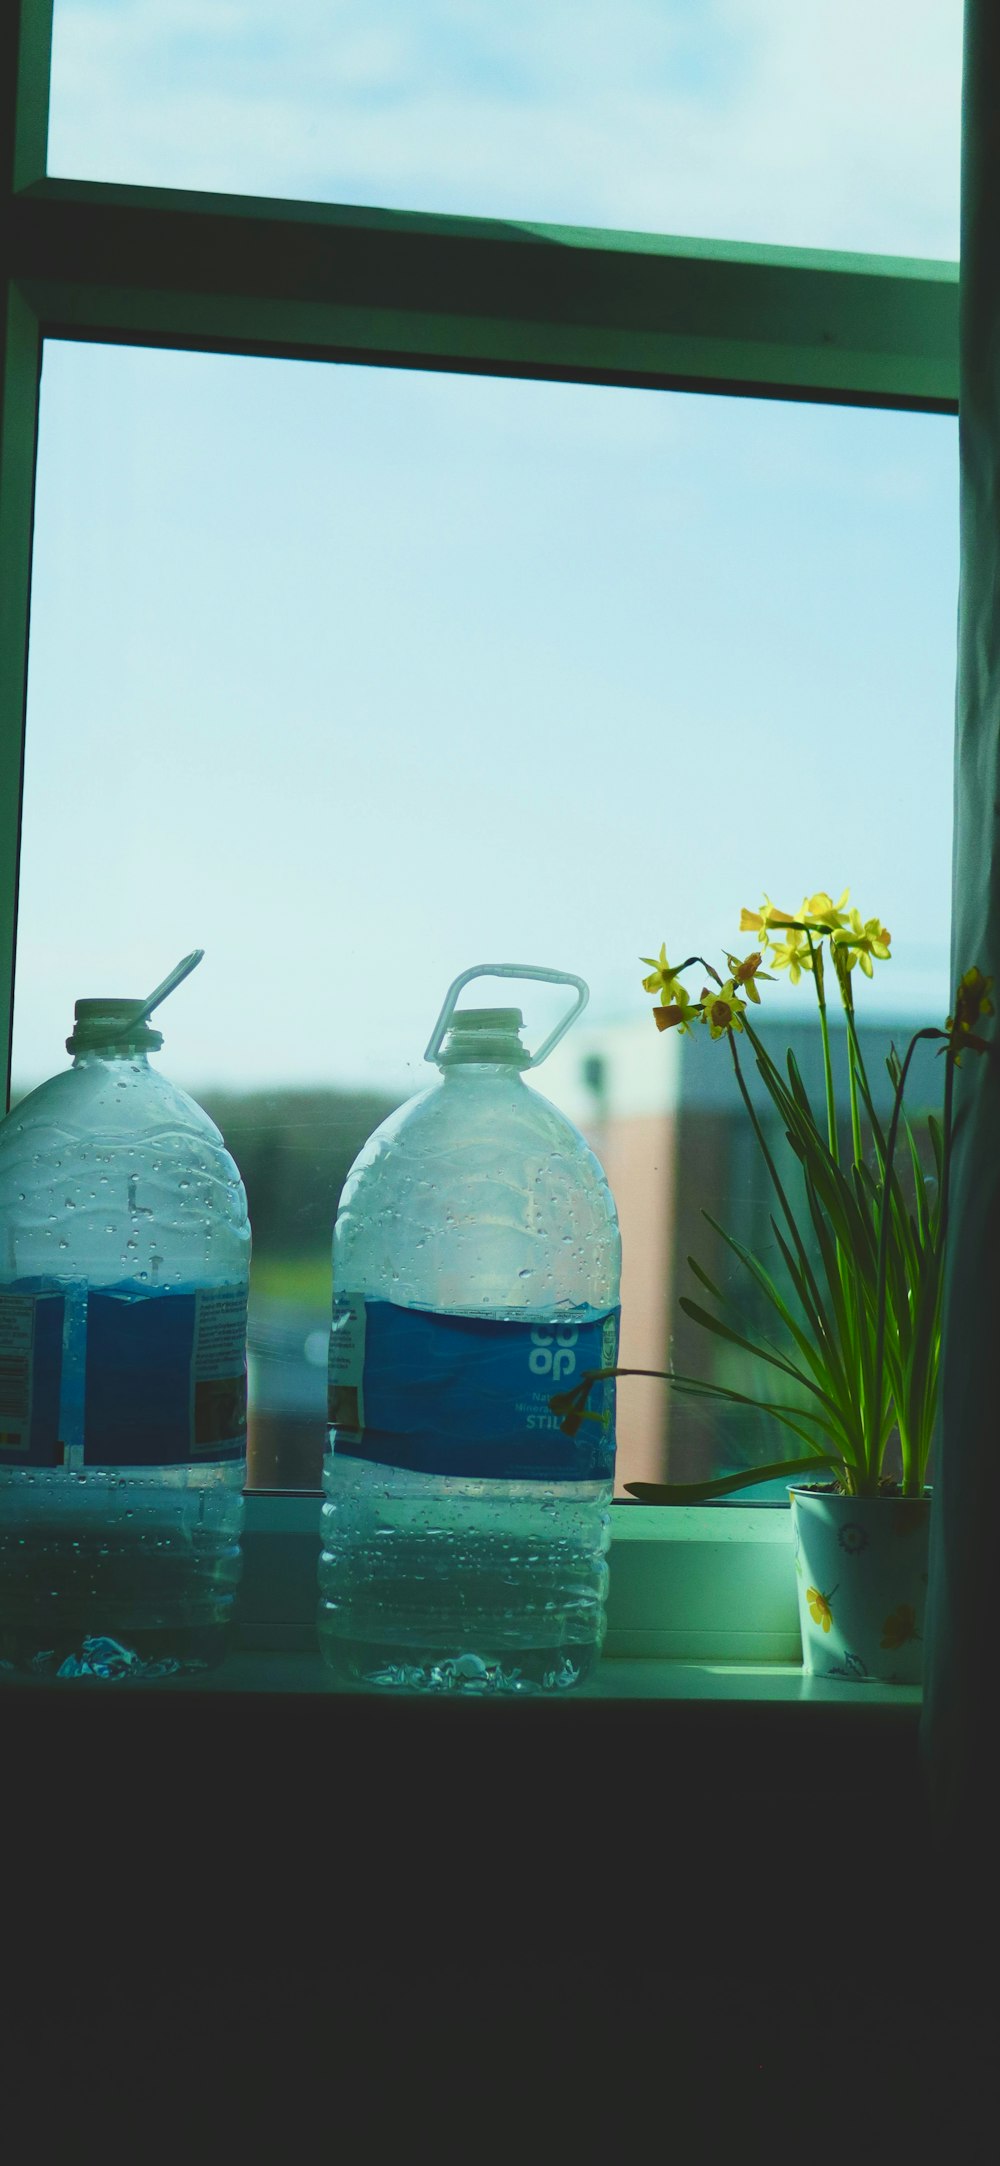 a couple of water jugs sitting on top of a window sill